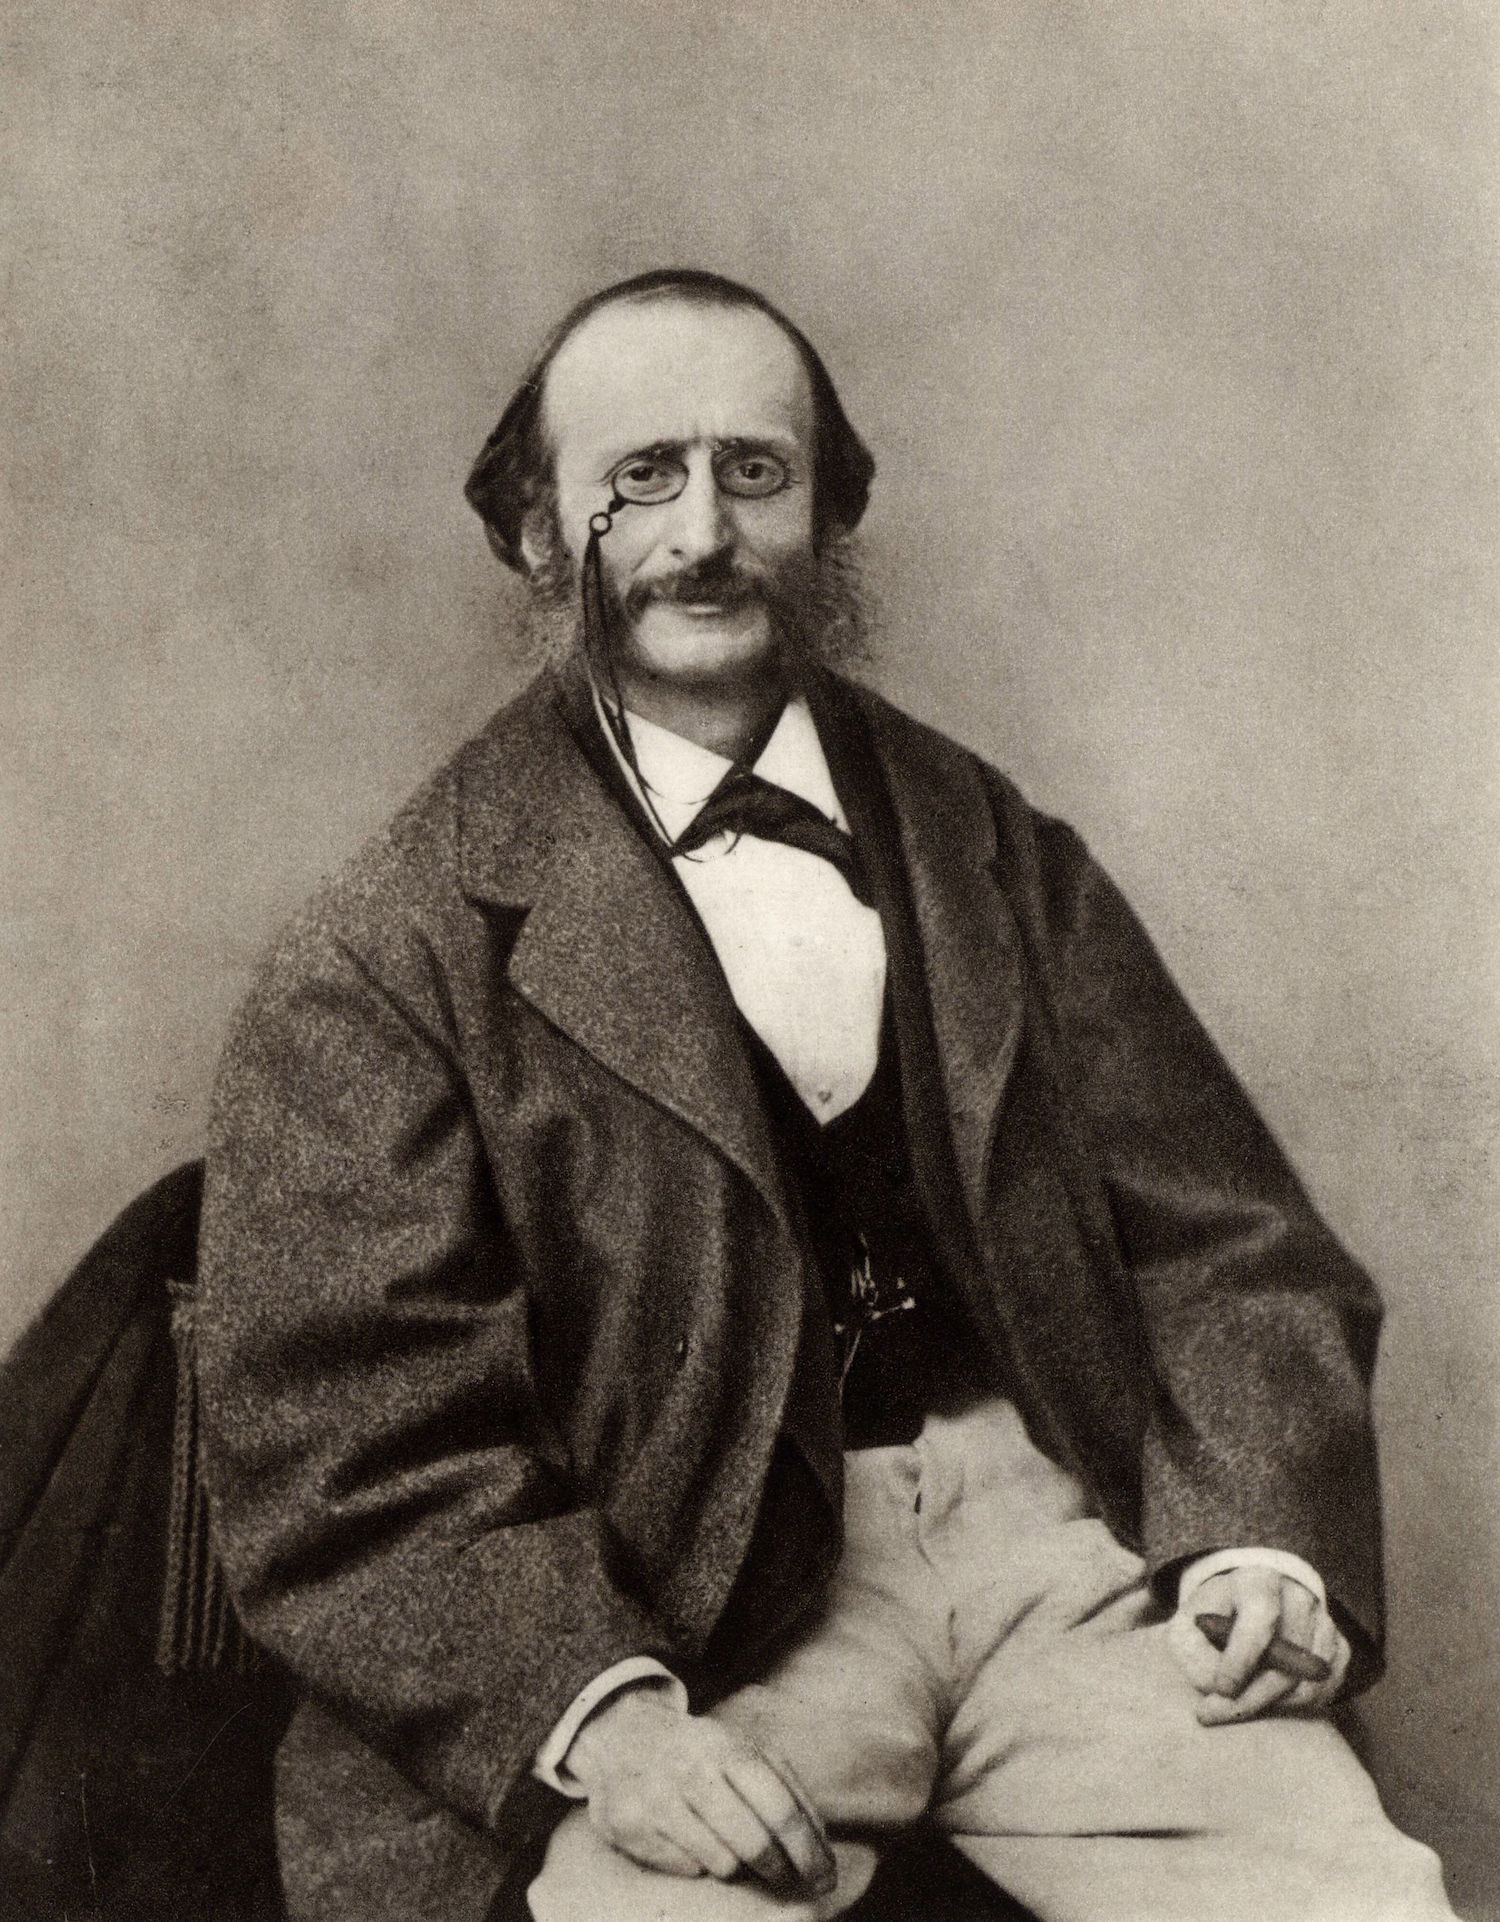 Jacques Offenbach (1819-1880) born Jakob Levy Eberst Offenbach at Cologne. German-born French opera-comique composer and conductor. From a photograph by Nadar, pseudonym of Gaspard-Felix Tournachon (1820-1910).